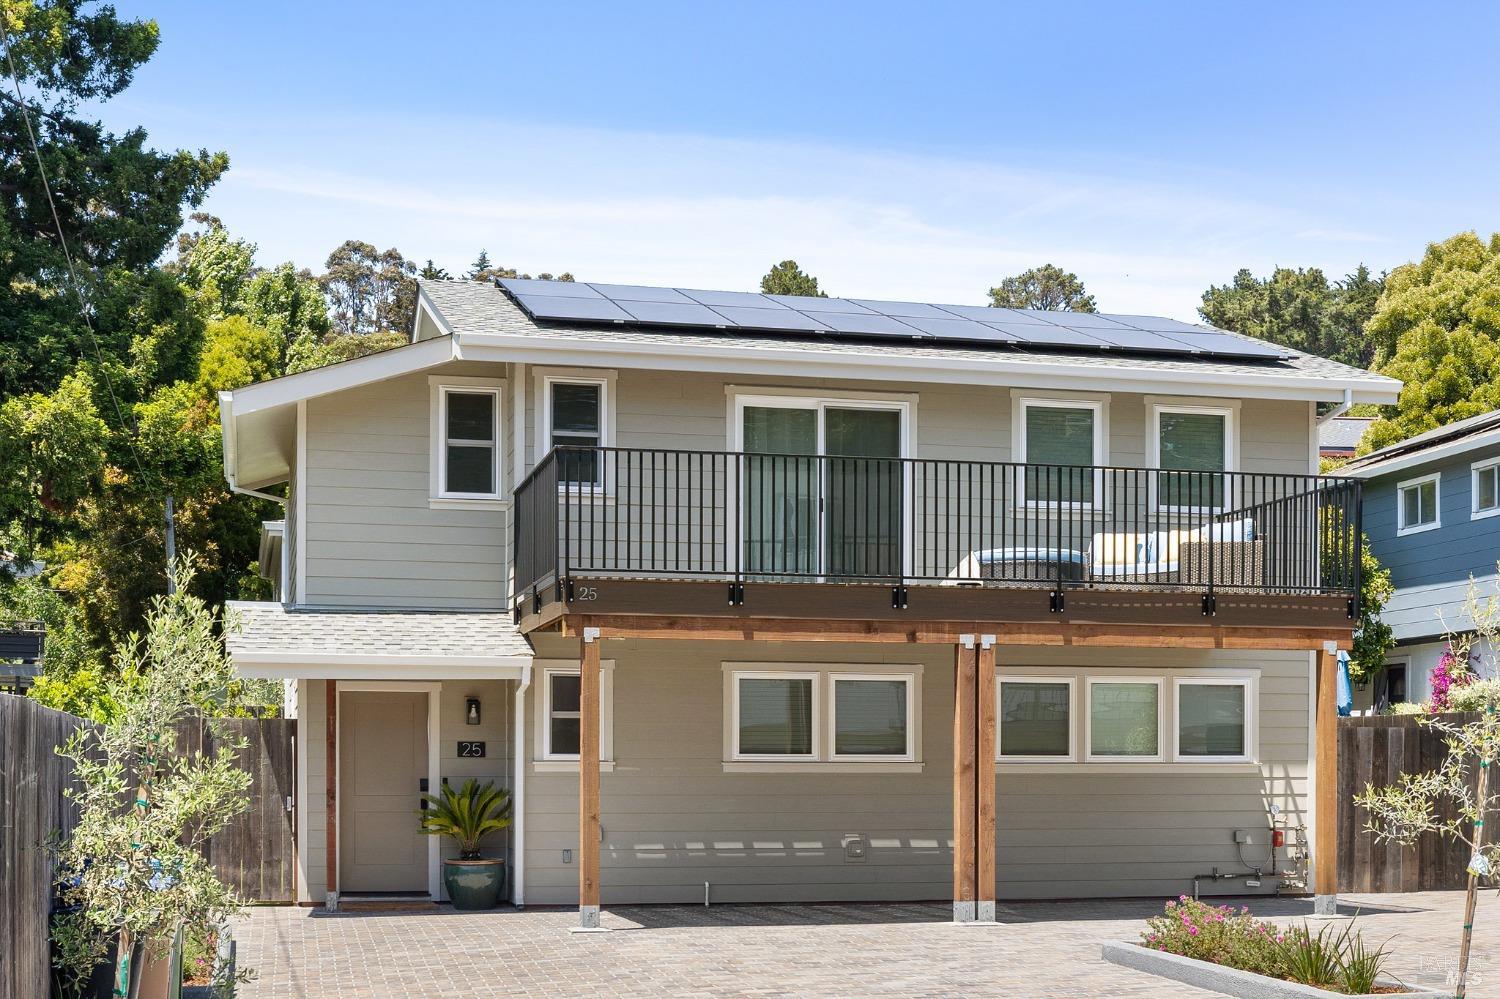 Photo of 25 Knoll Ln in Mill Valley, CA